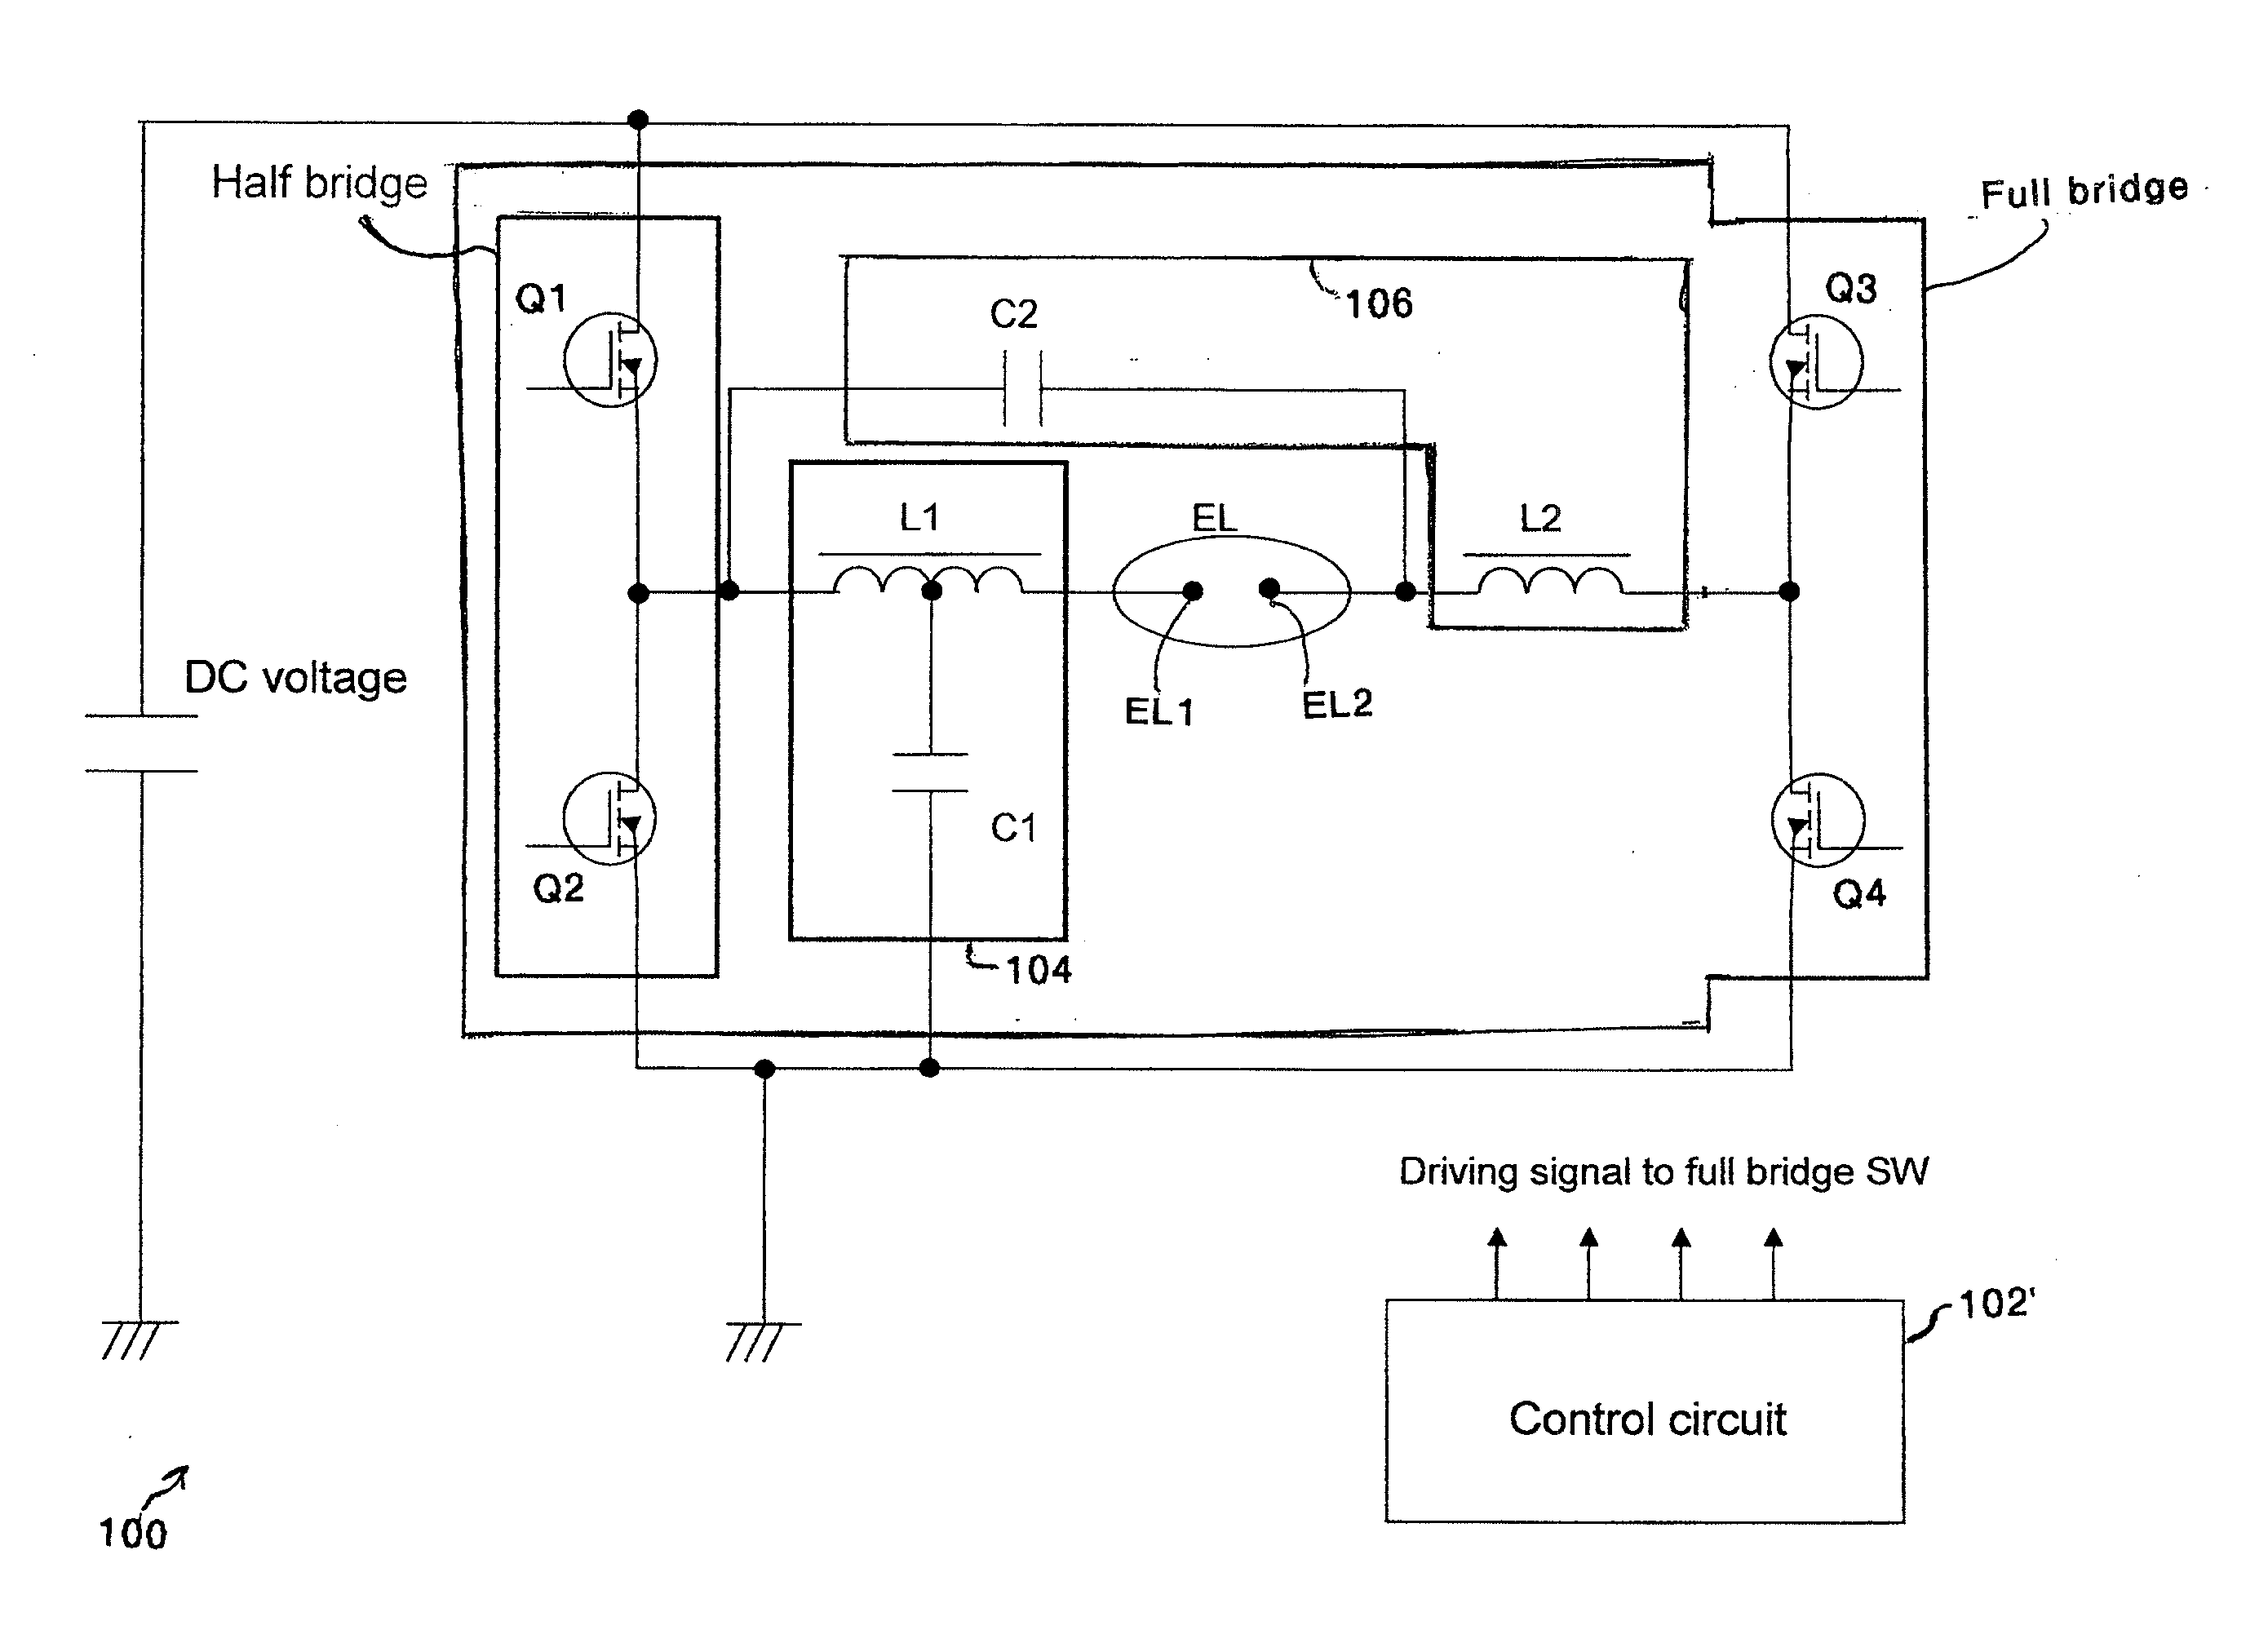 Circuit arrangement for operating a discharge lamp